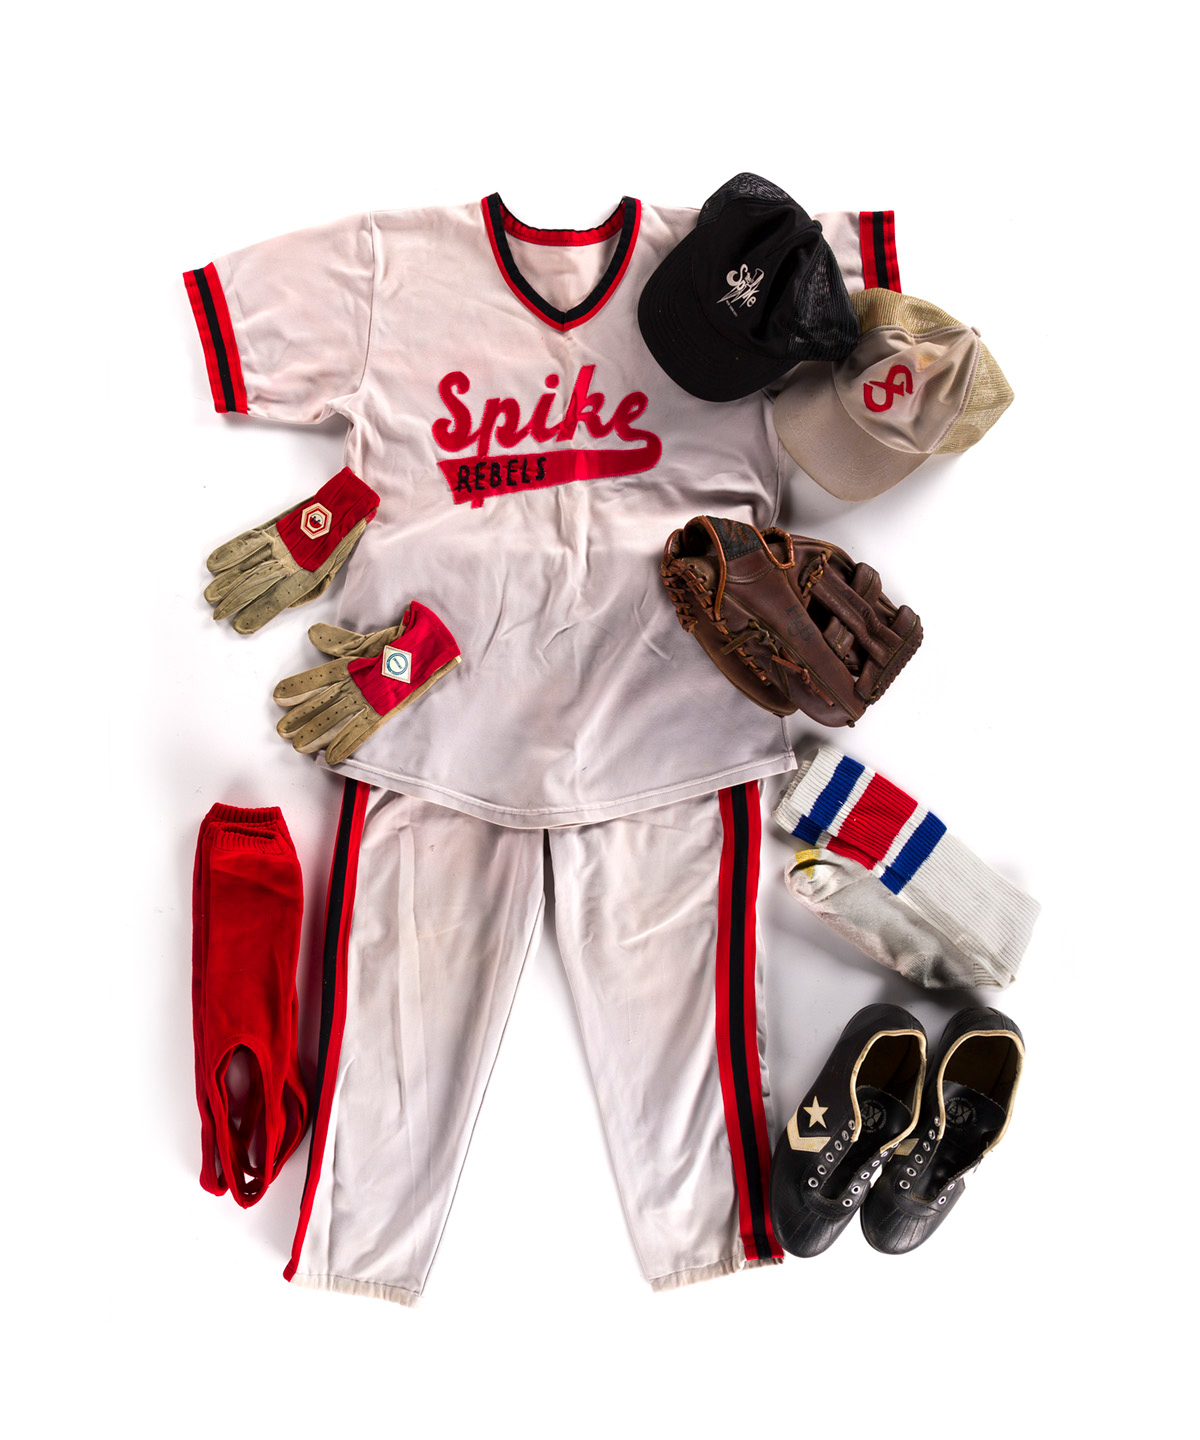 THE SPIKE. Complete softball uniform from this renowned New York leather bar.